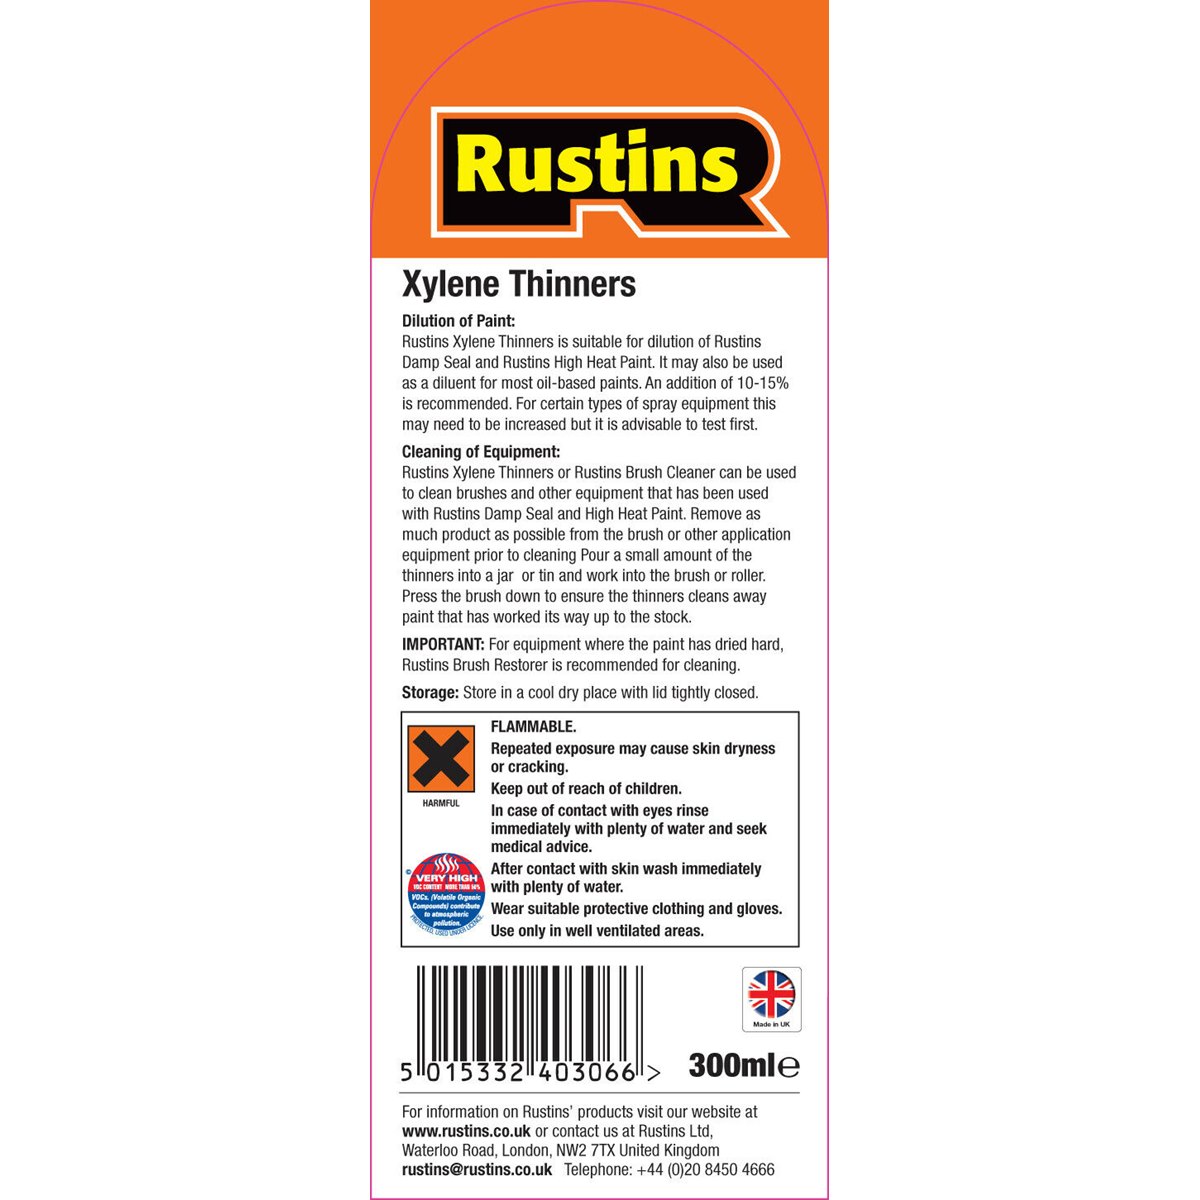 How to Use Rustins Xylene Thinners